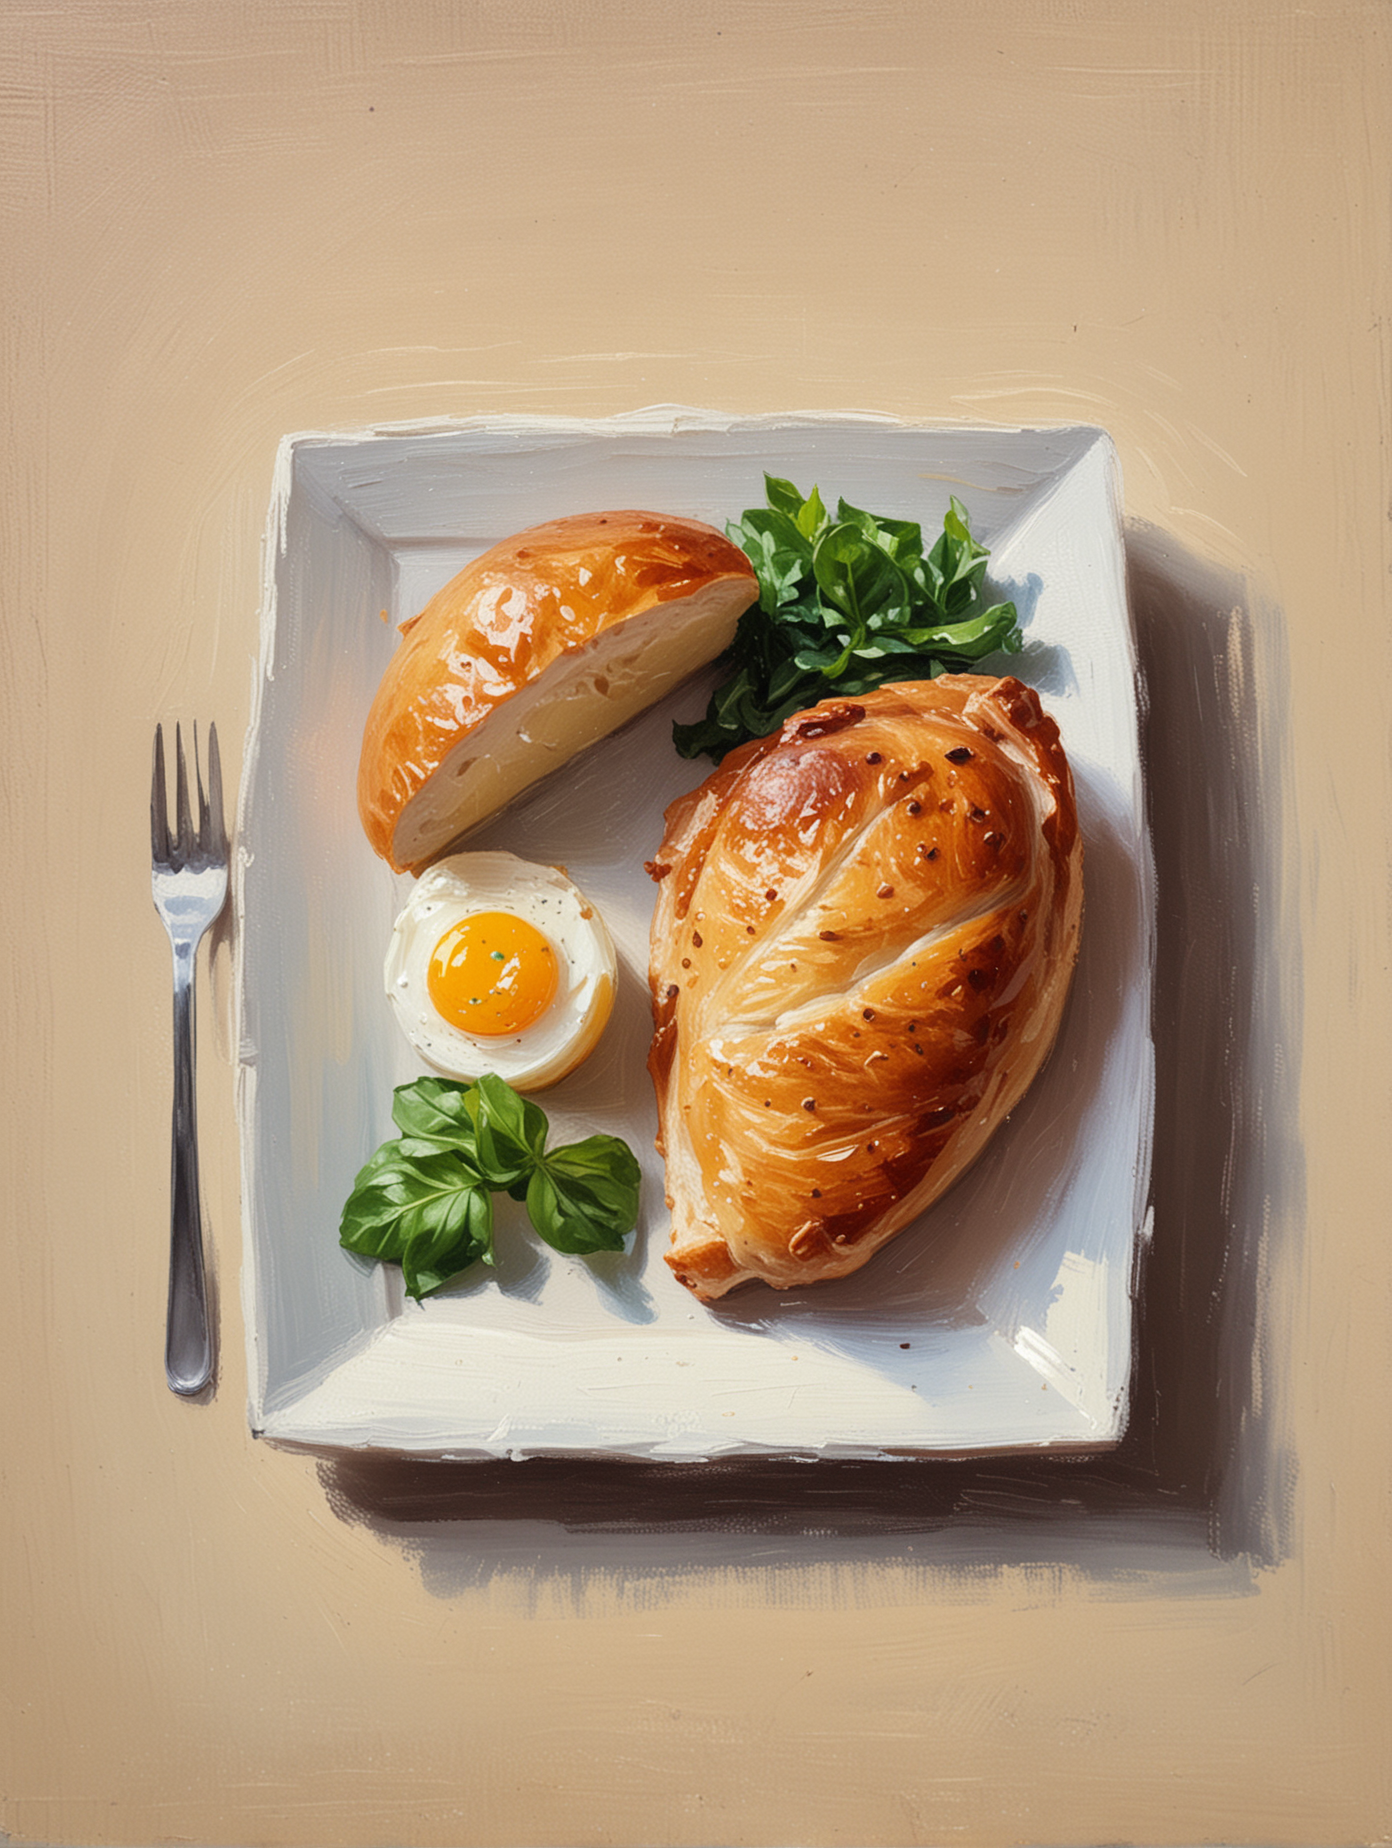 Impressionist painting of a small simple meal